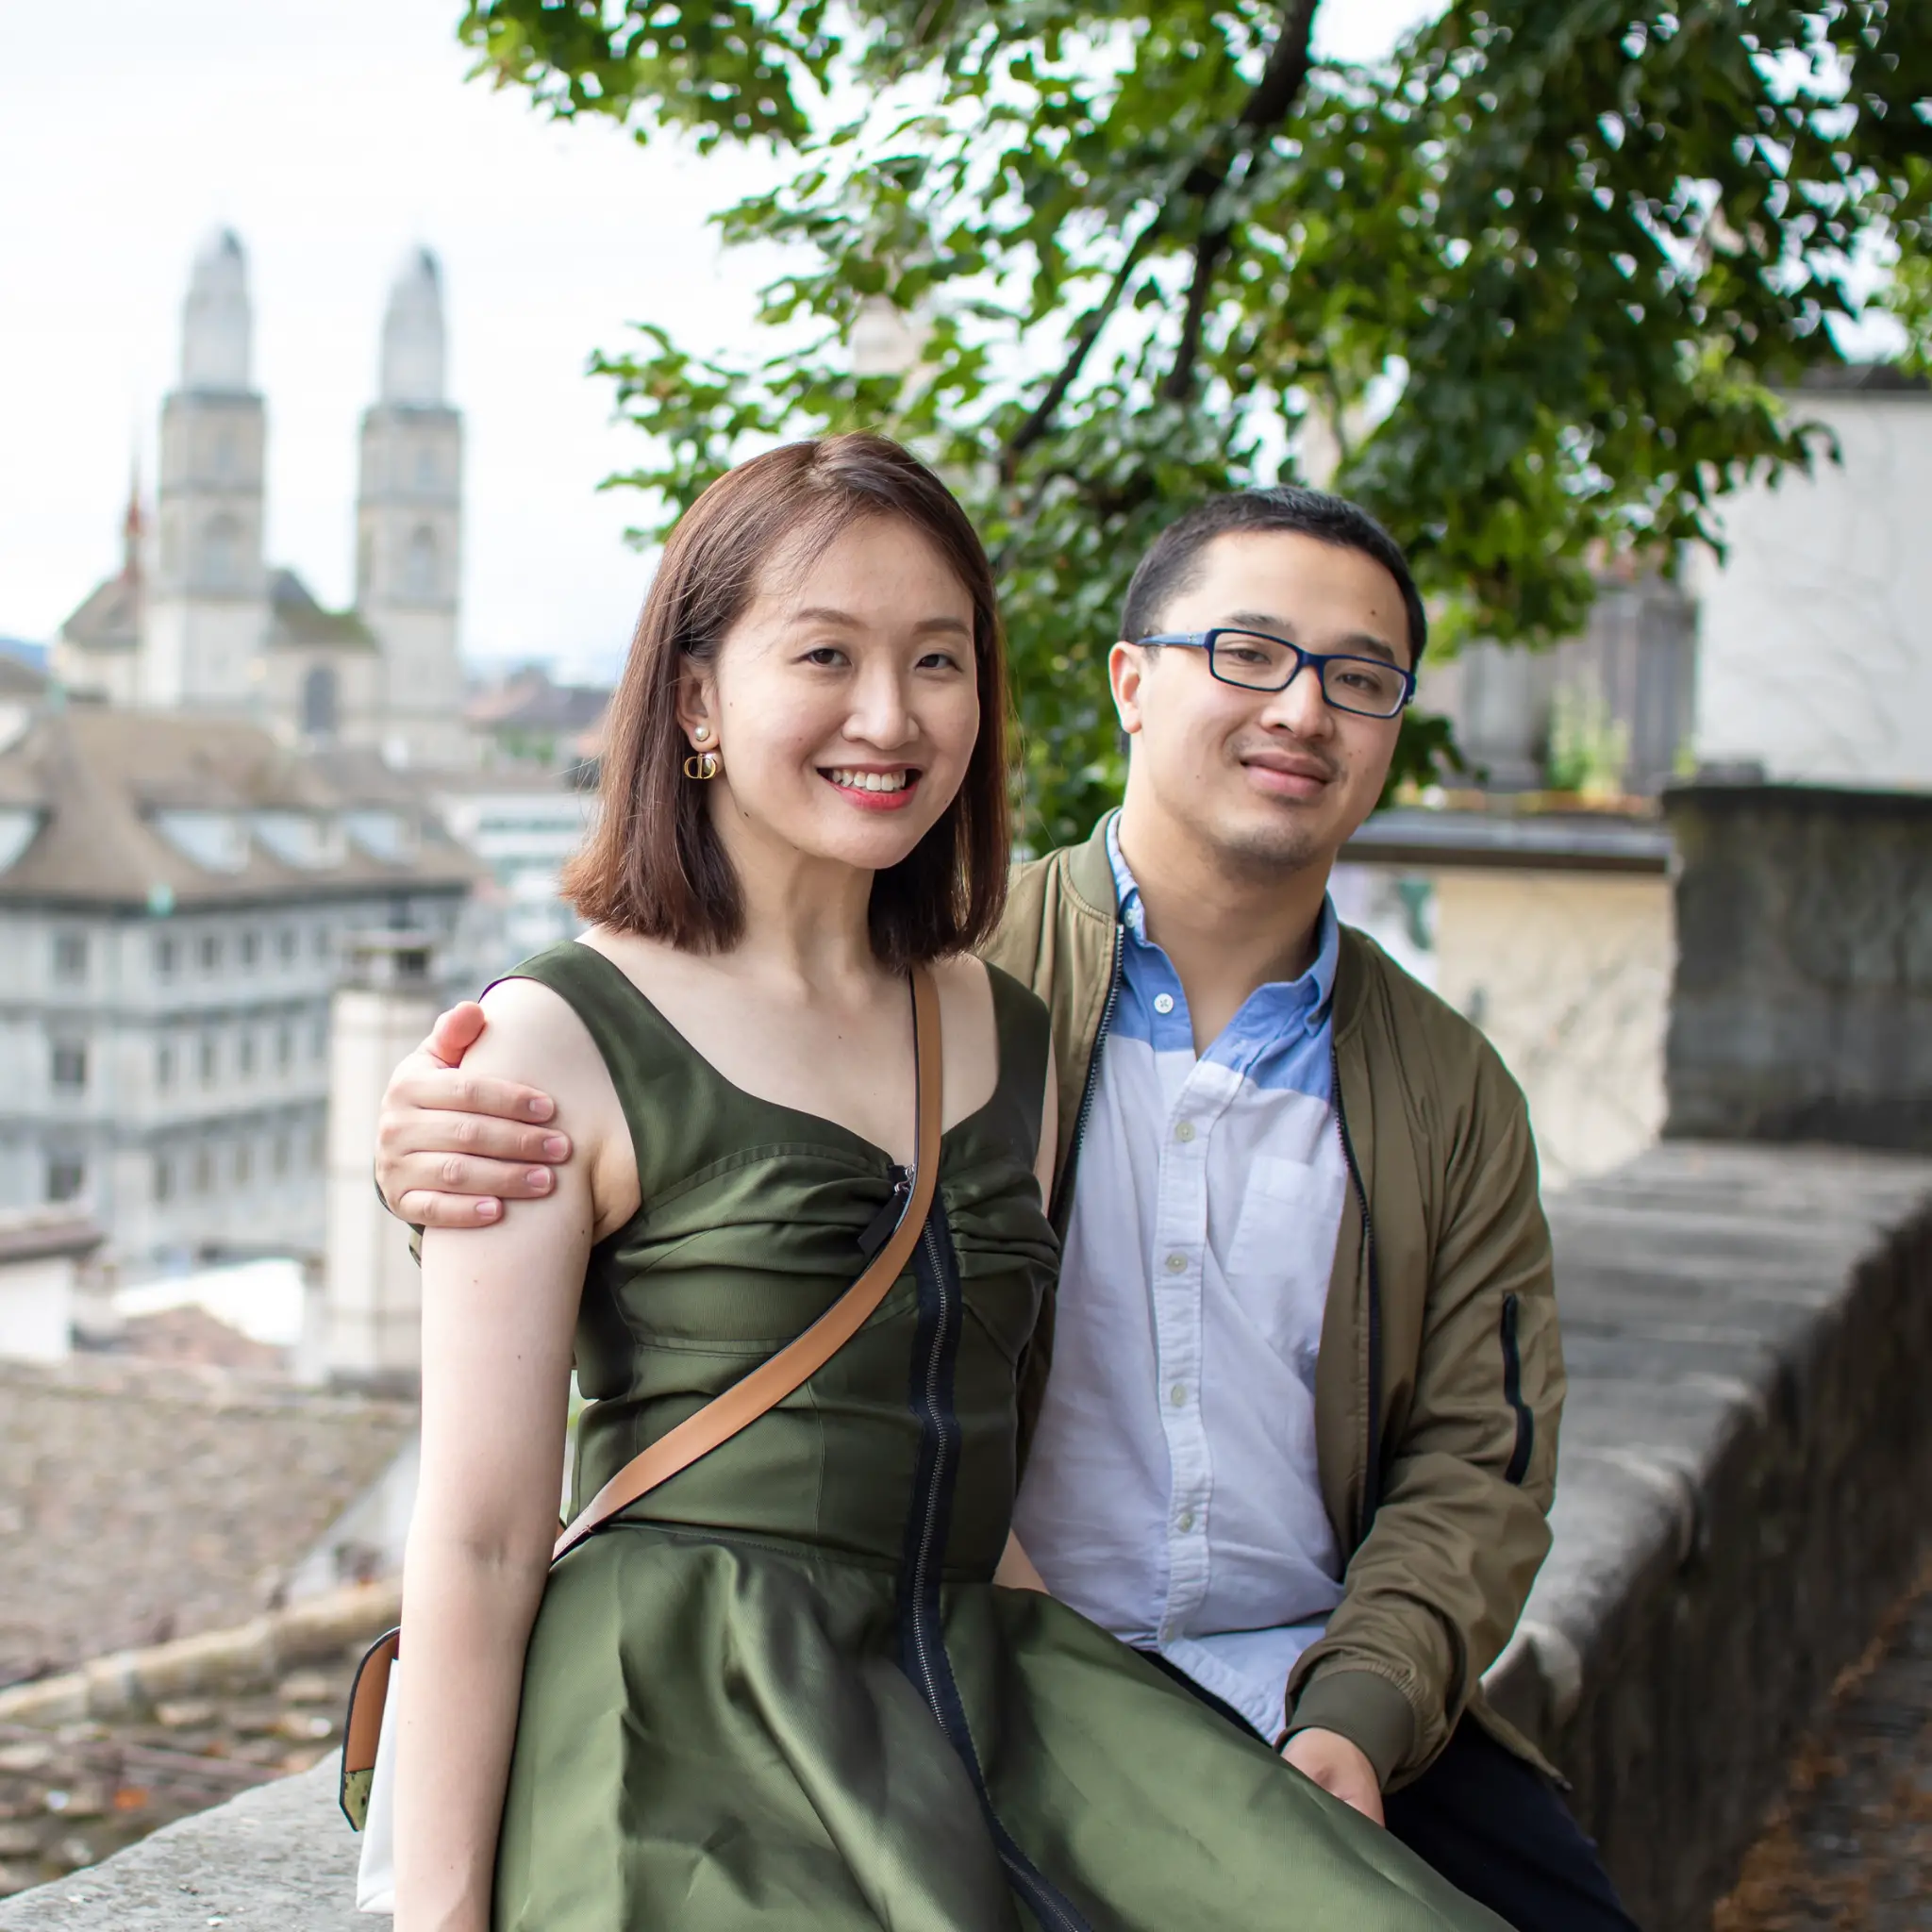 Couple's photoshoot by Cloudia, Localgrapher in Zurich